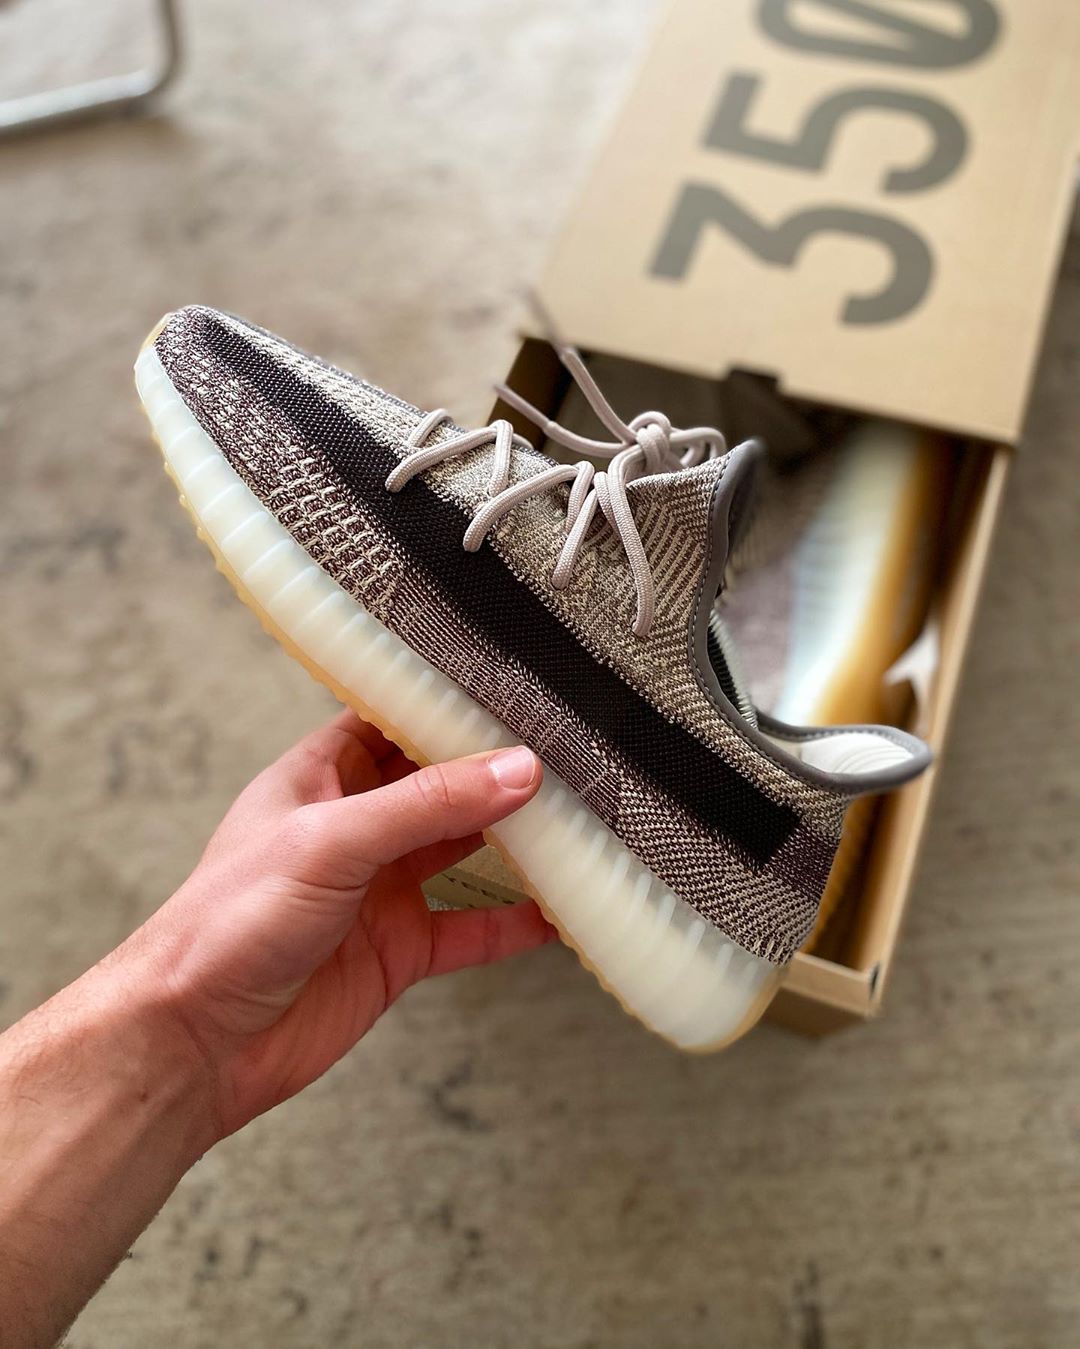 Release of the adidas Yeezy Boost 350 V2 